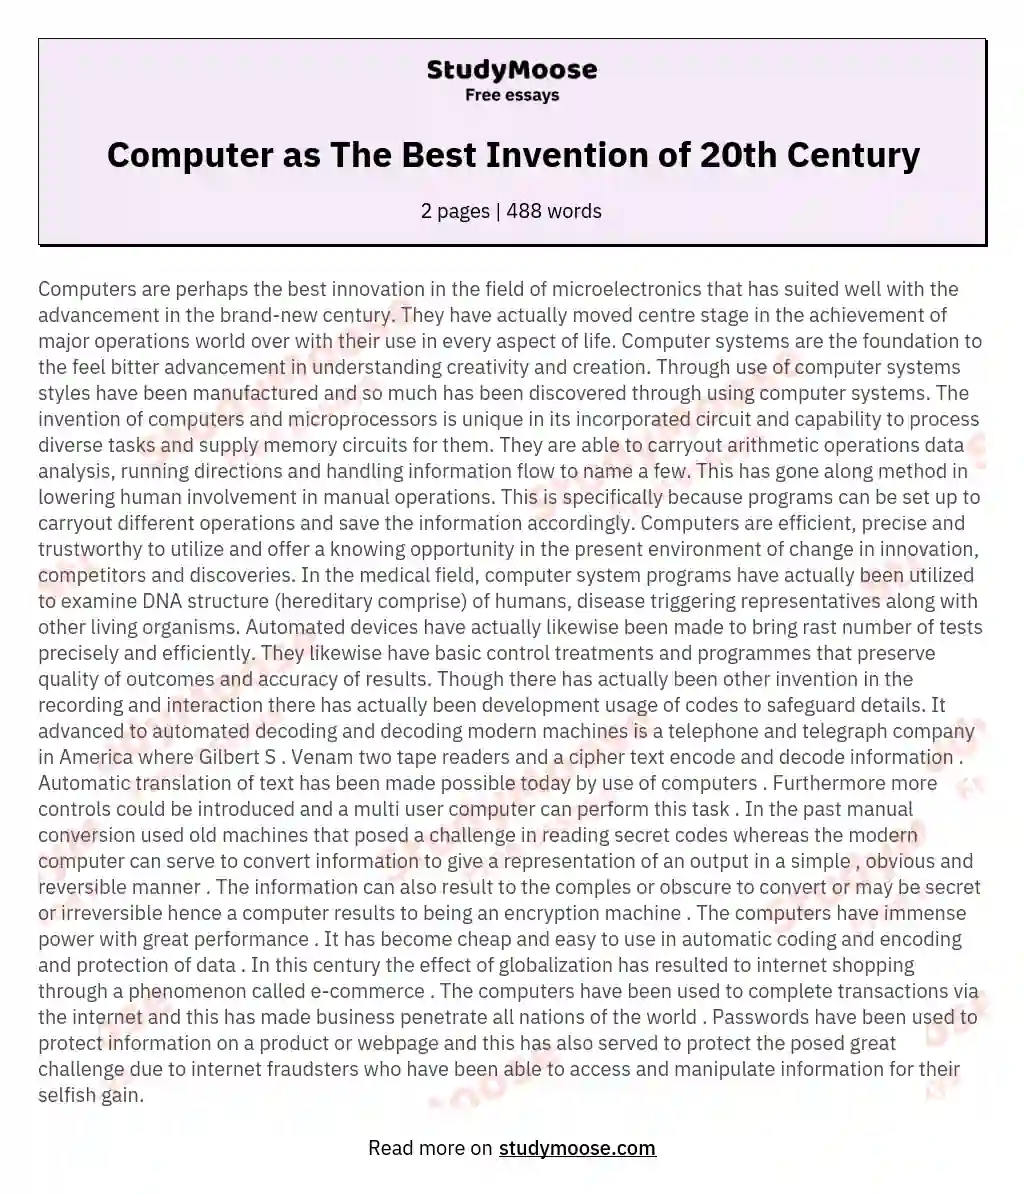 Computer as The Best Invention of 20th Century